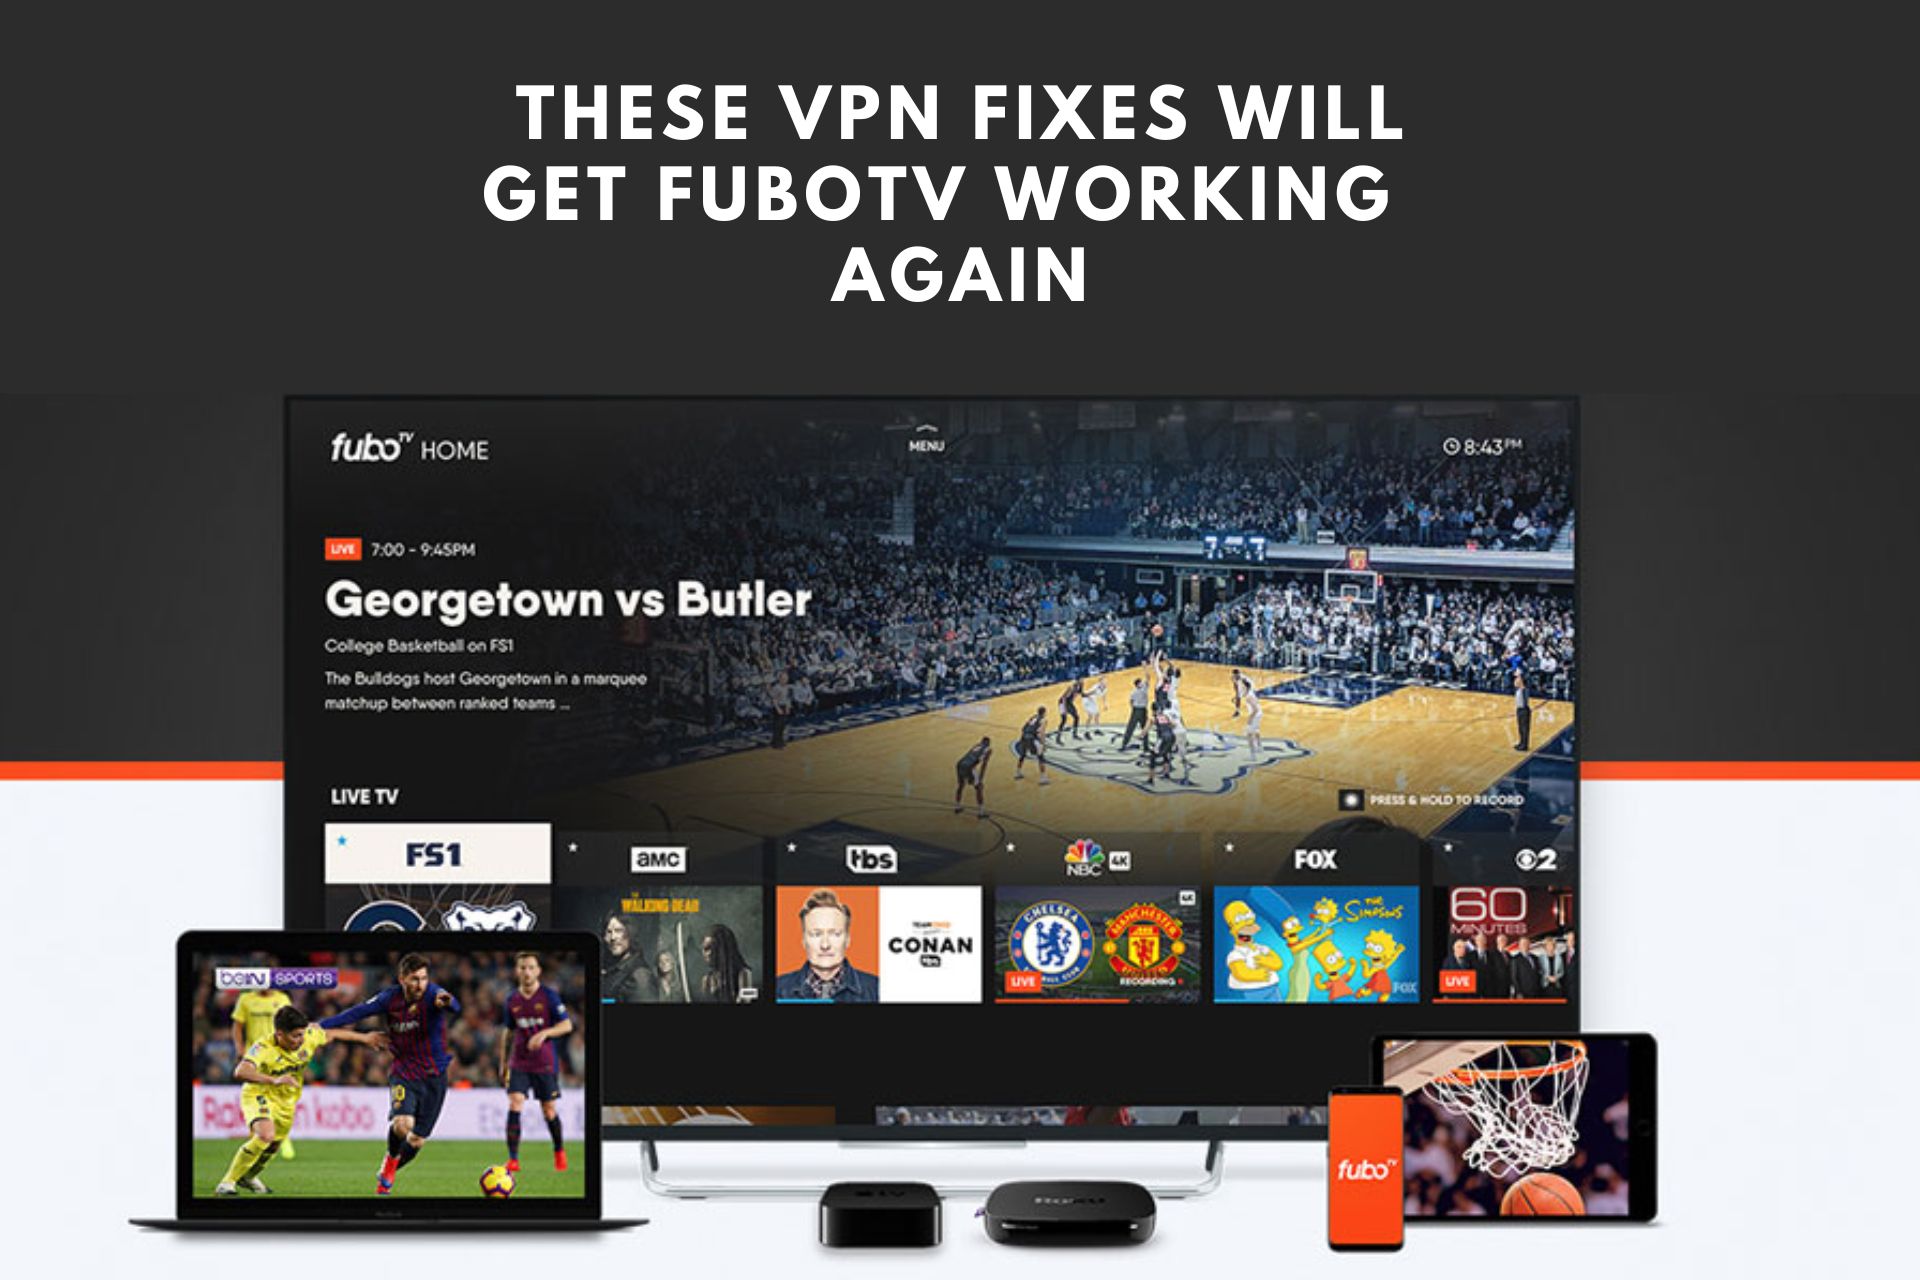 These VPN fixes will get FuboTV working again